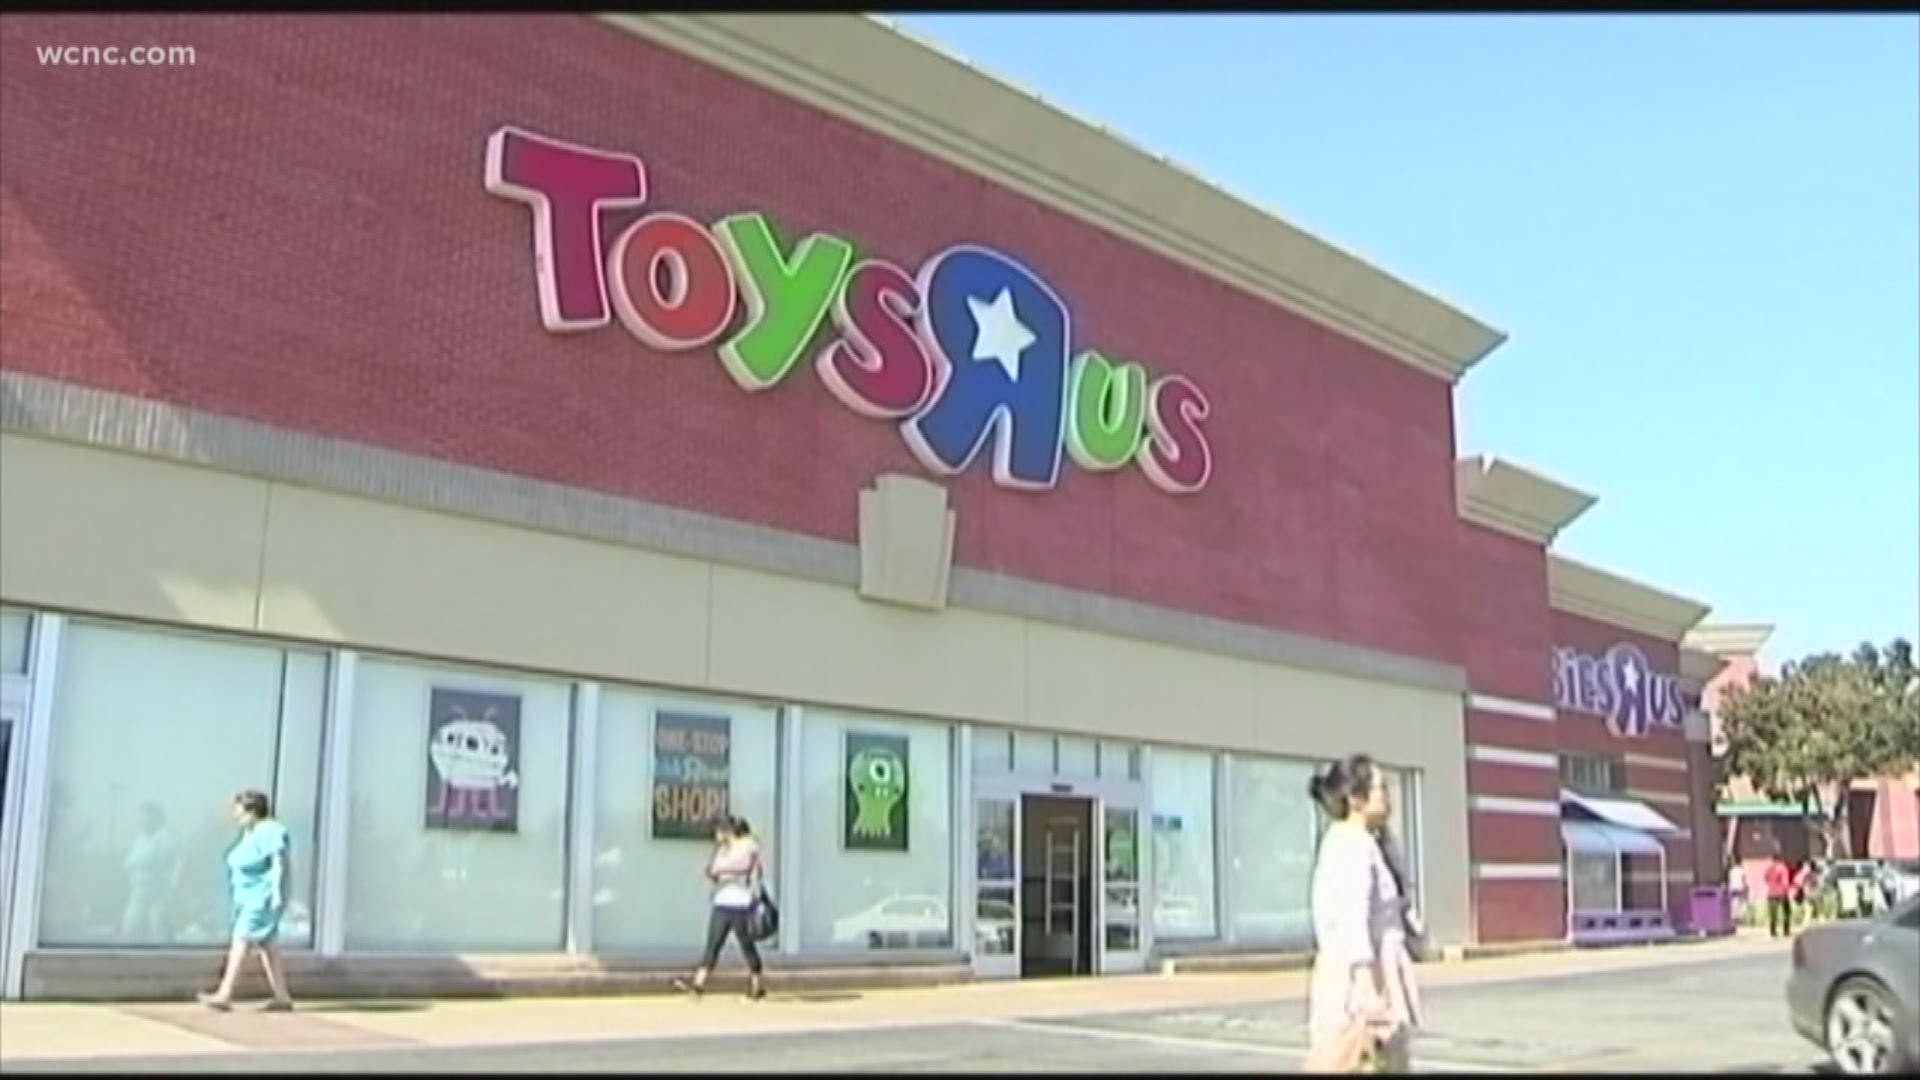 Toys R Us is making a comeback. The iconic toy store announced plans to open a half dozen new locations ahead of the Christmas shopping season, as well as an online store.